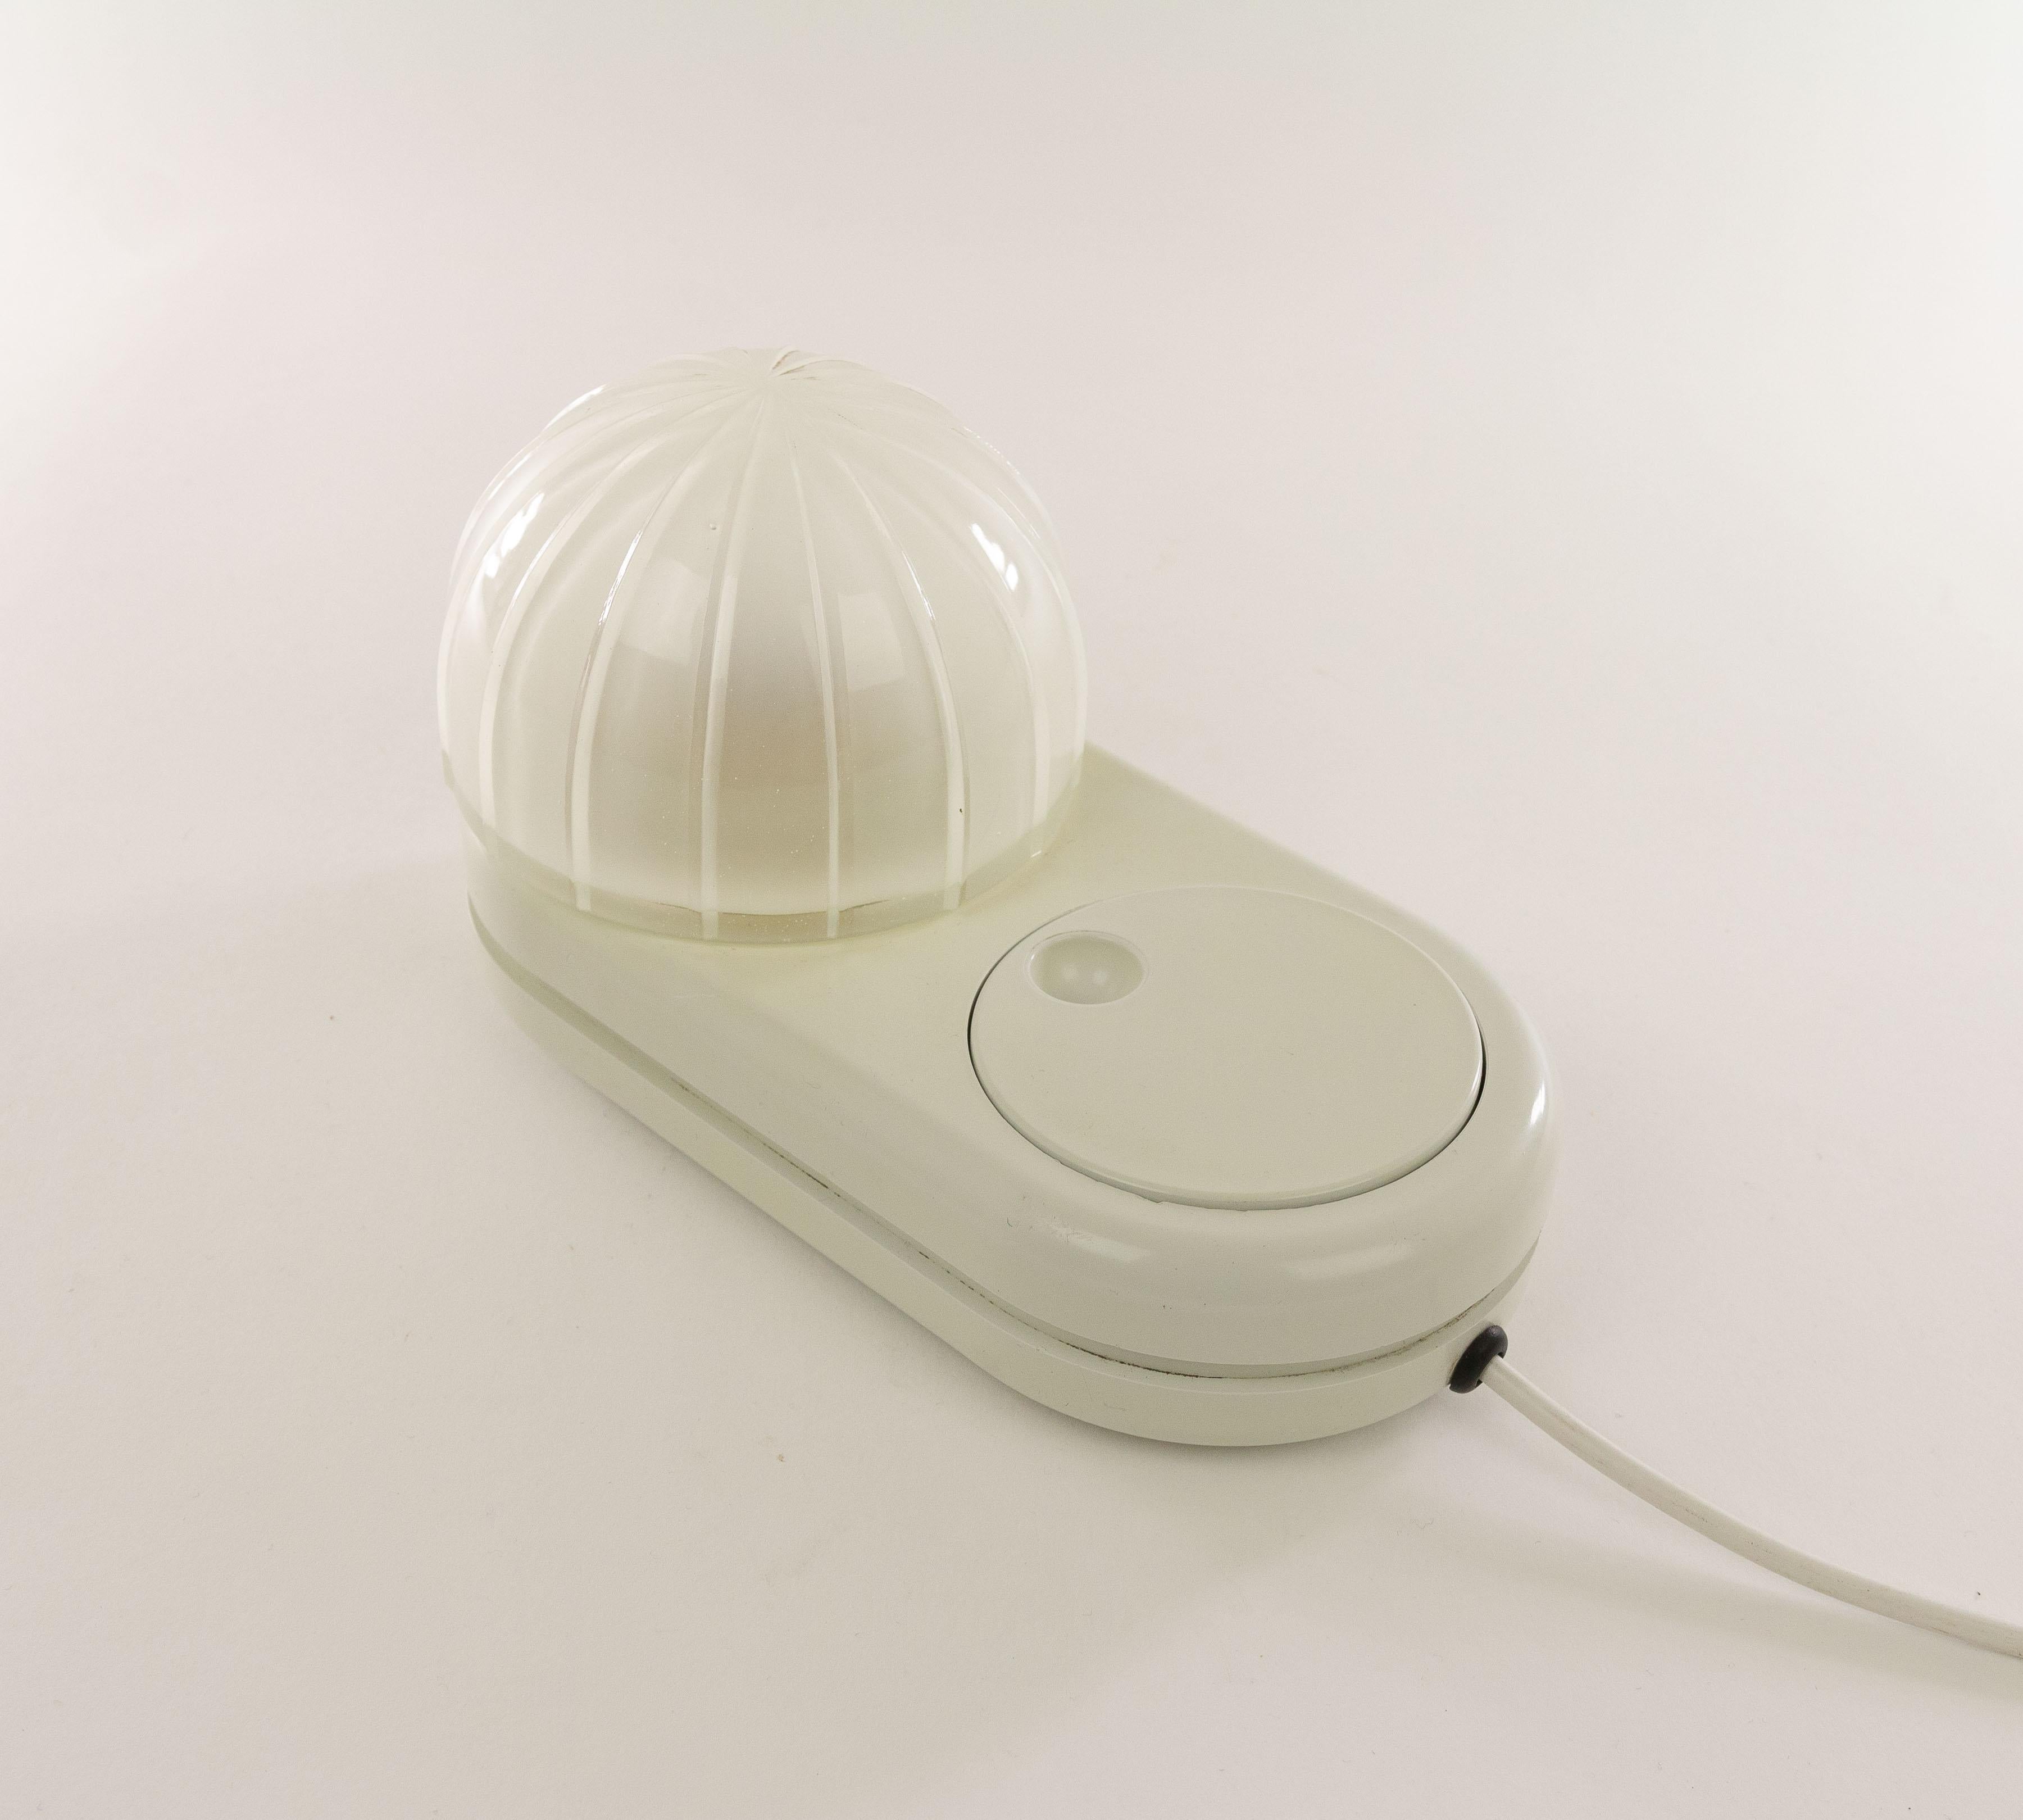 White Farstar table lamp designed by Adalberto Dal Lago (1973) and manufactured by Bieffeplast.

The dome shaped glass shade sits on a plastic base. The large round light dimmer that also functions as an on / off switch is a characteristic feature